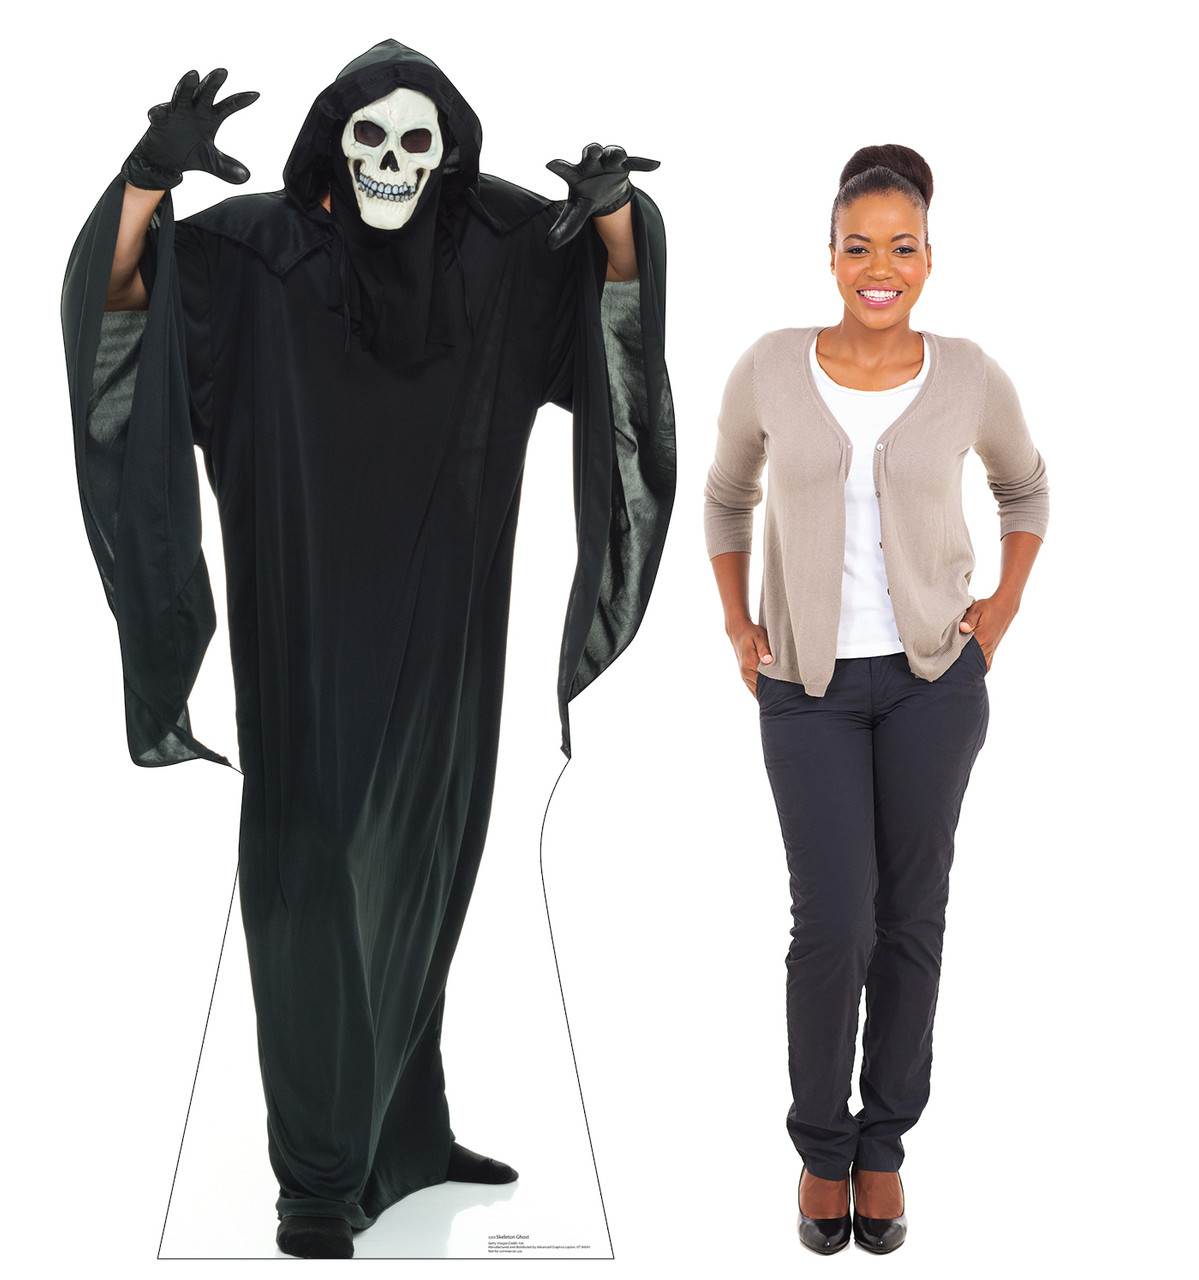 Life-size cardboard standee of a Skeleton Ghost with model.